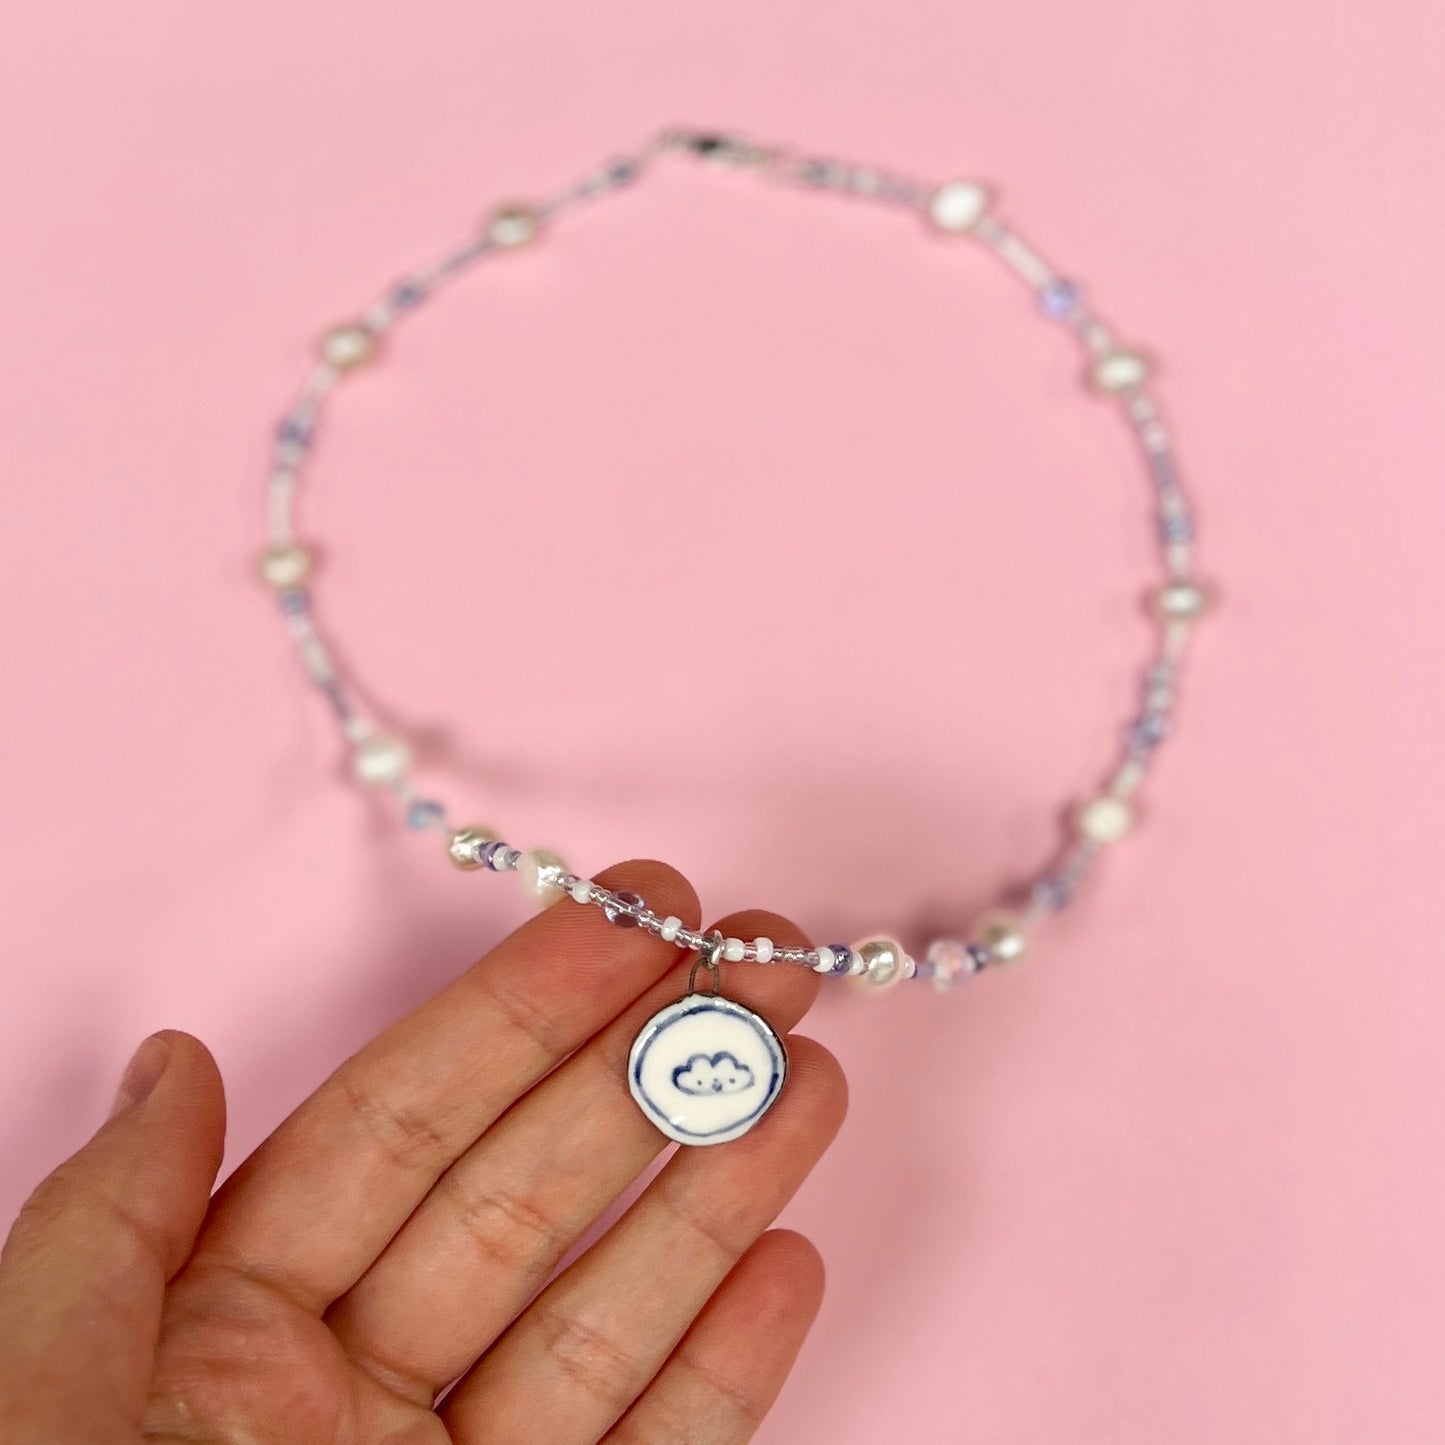 "I Love Me" Cloud Coin Necklace